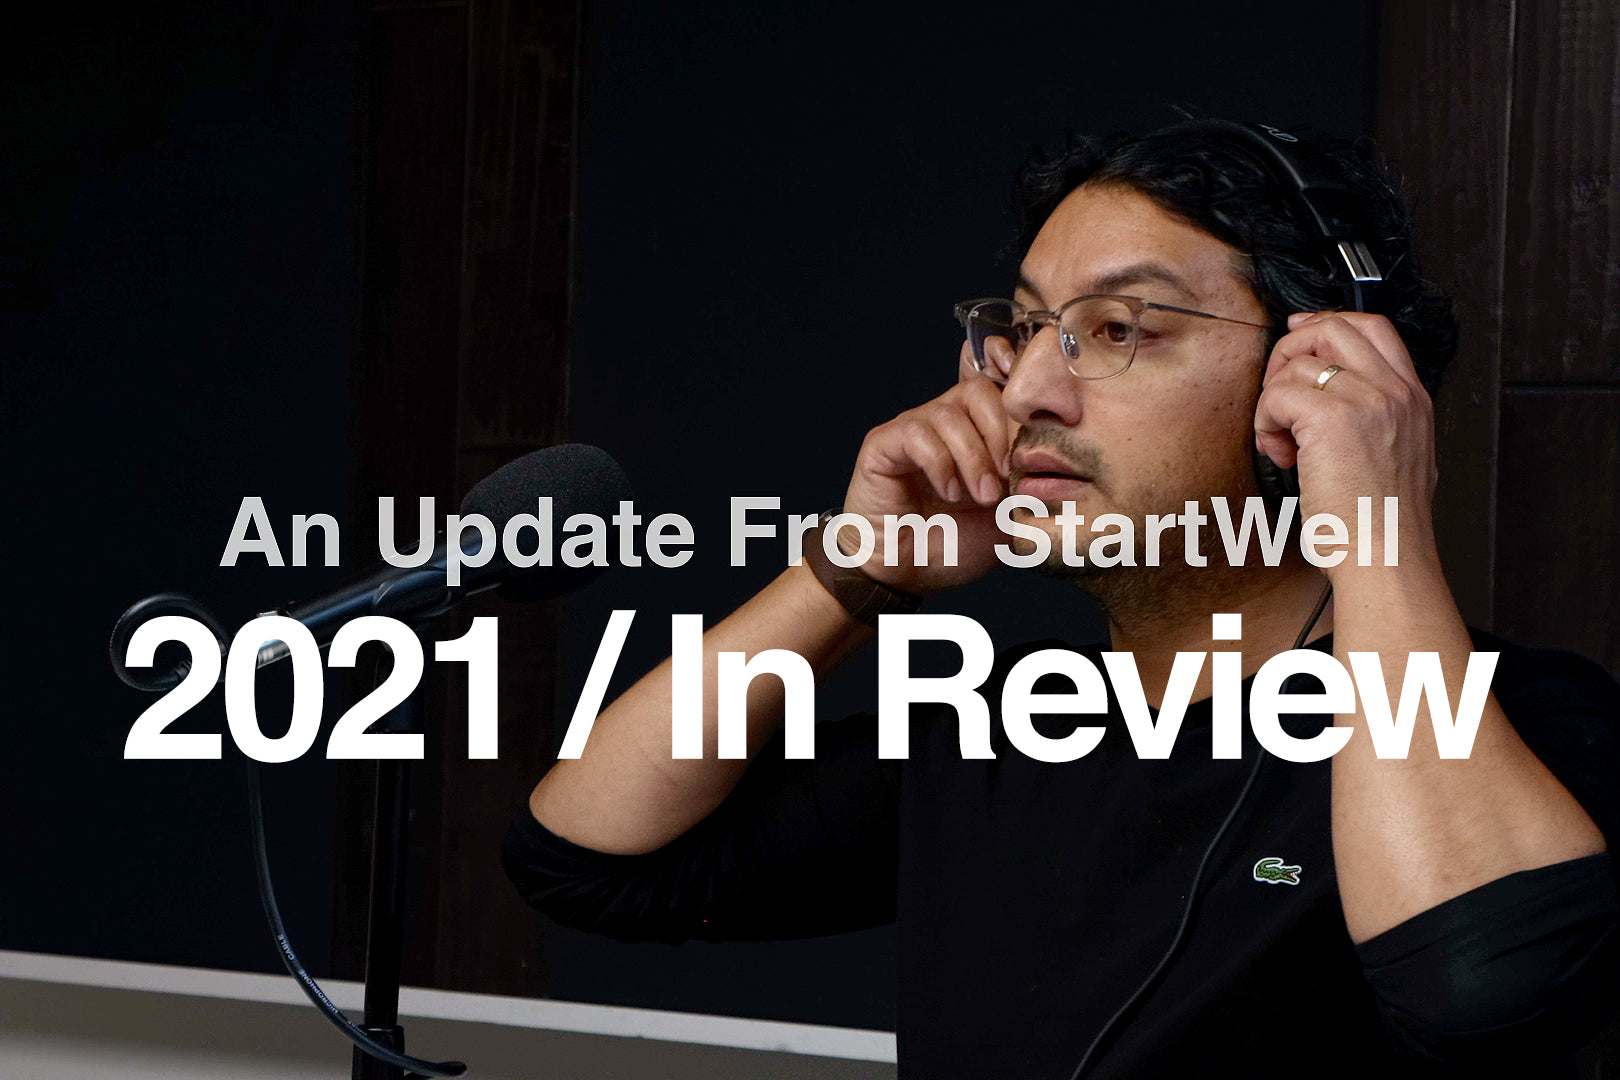 StartWell's 2021 review with Founder Qasim Virjee